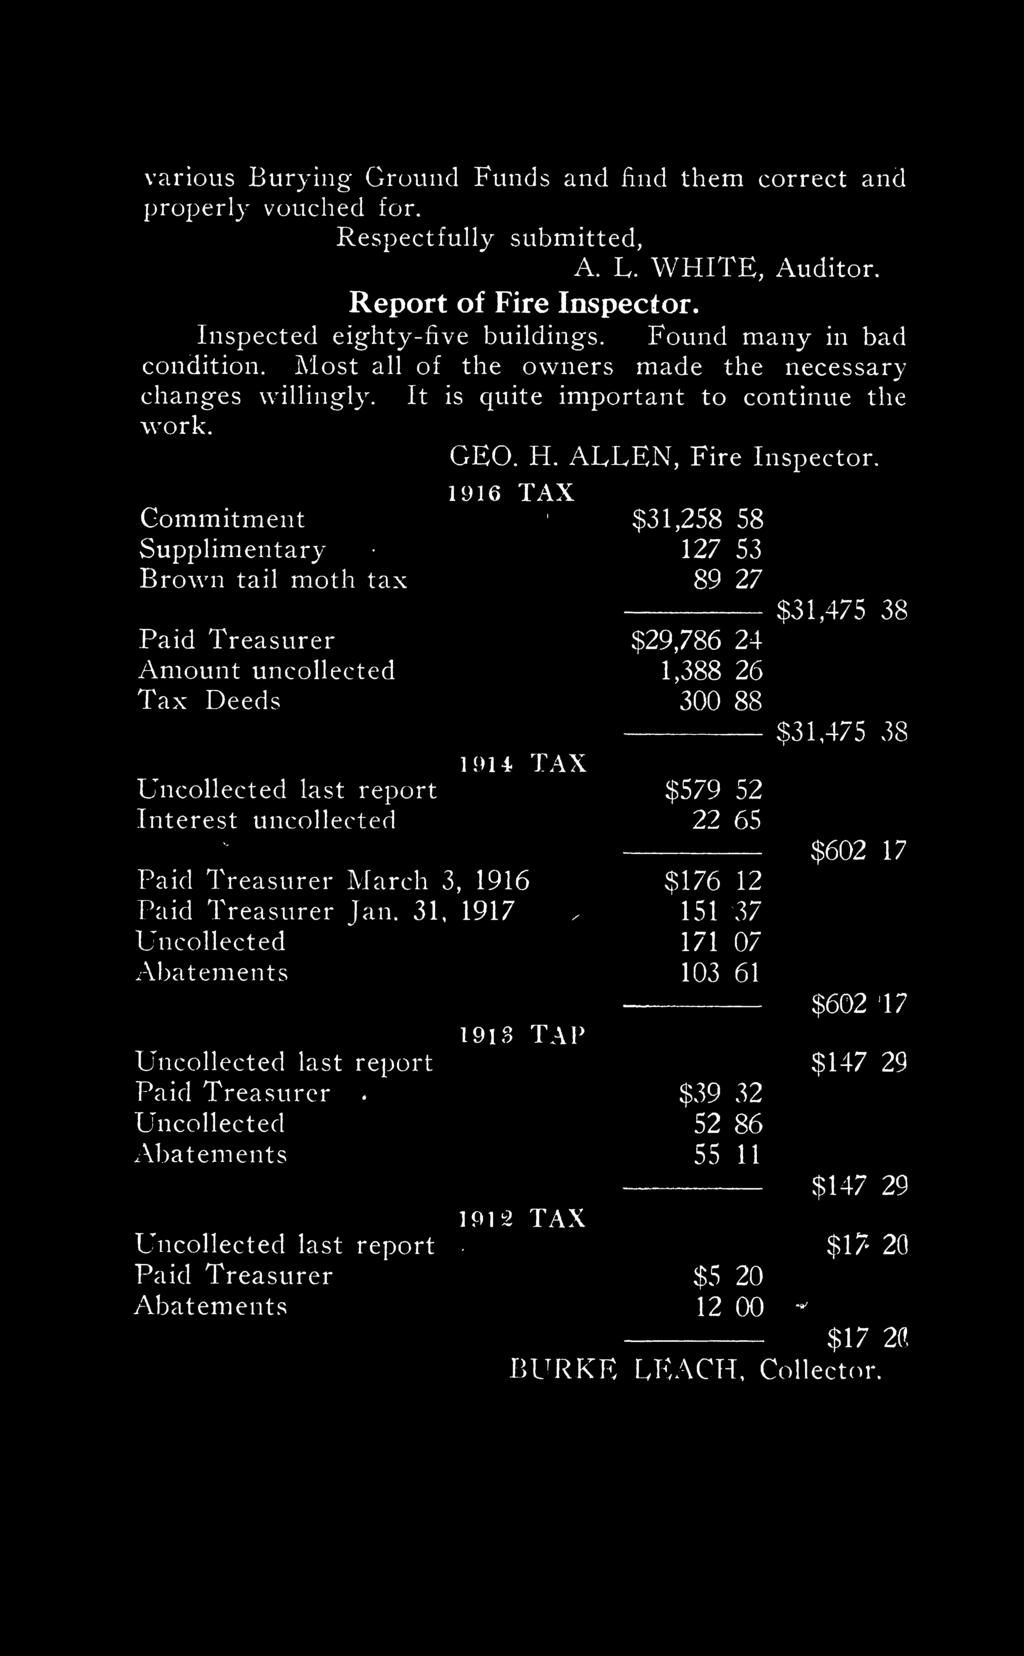 1916 TAX Commitment ; $31,258 58 Supplimentary 127 53 Brown tail moth tax 89 27 Paid Treasurer $29,786 24 Amount uncollected 1,388 26 Tax Deeds 30088 1914 TAX Uncollected last report $579 52 Interest